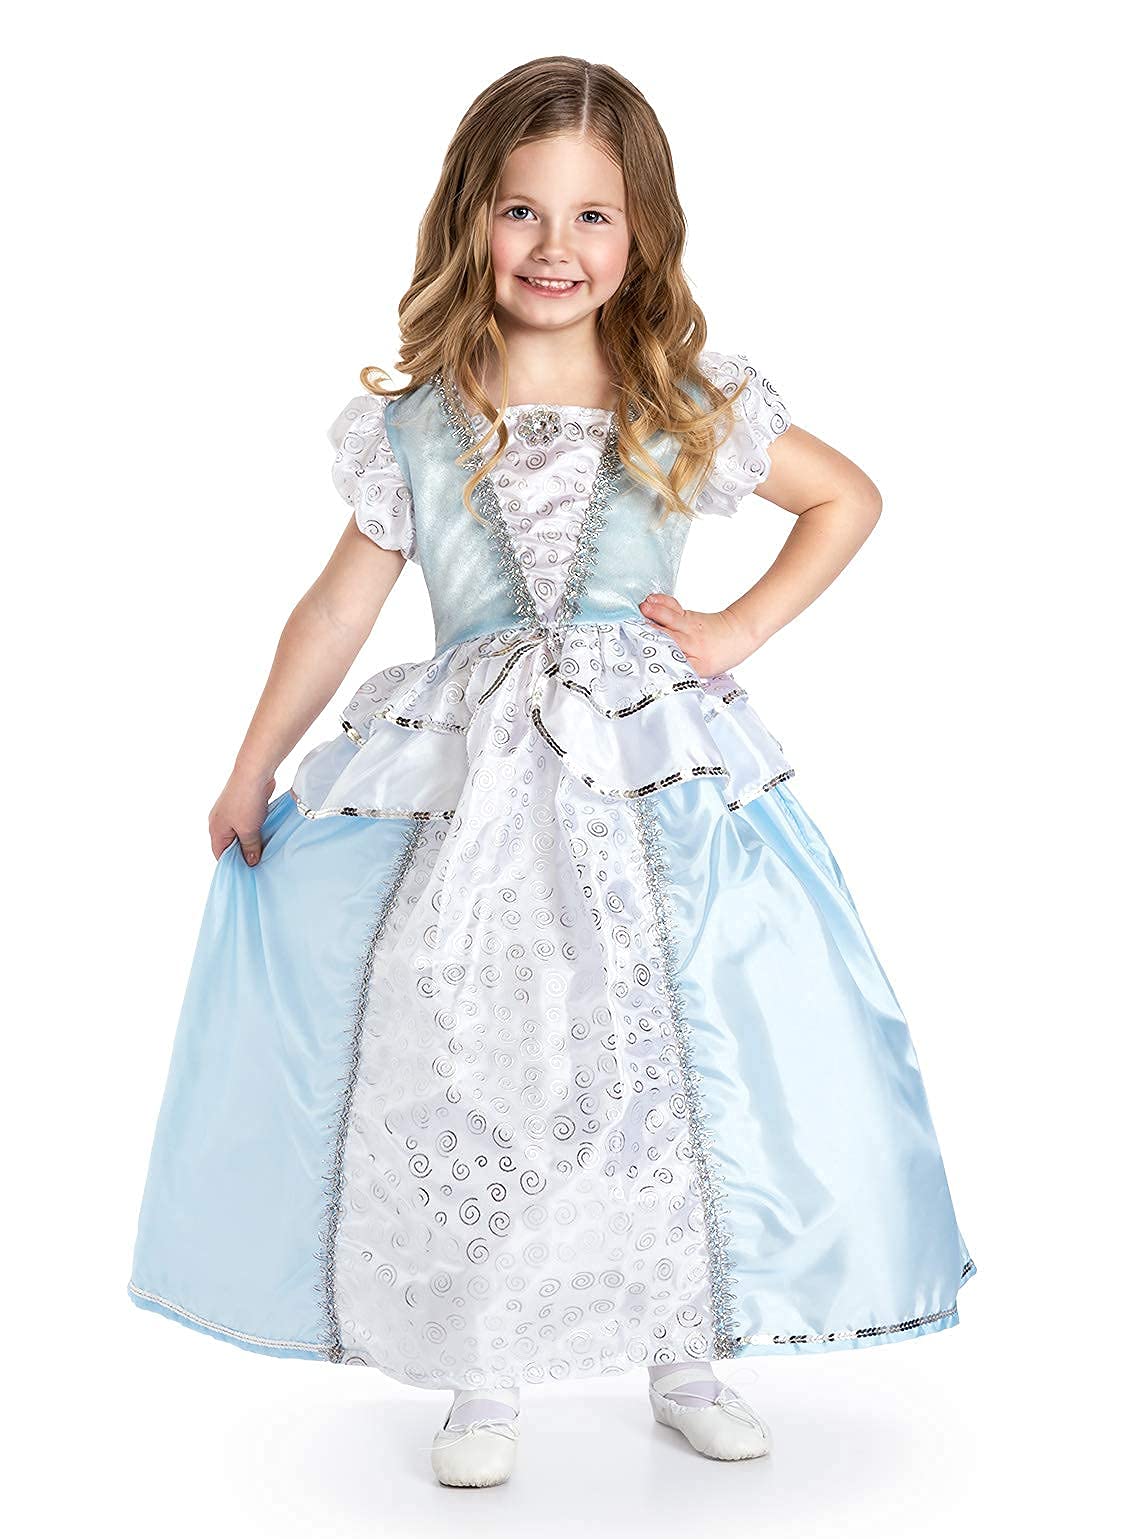 Little Adventures Cinderella Princess Dress Up Costume (Large Age 5-7) with Matching Doll Dress - Machine Washable Child Pretend Play and Party Dress with No Glitter